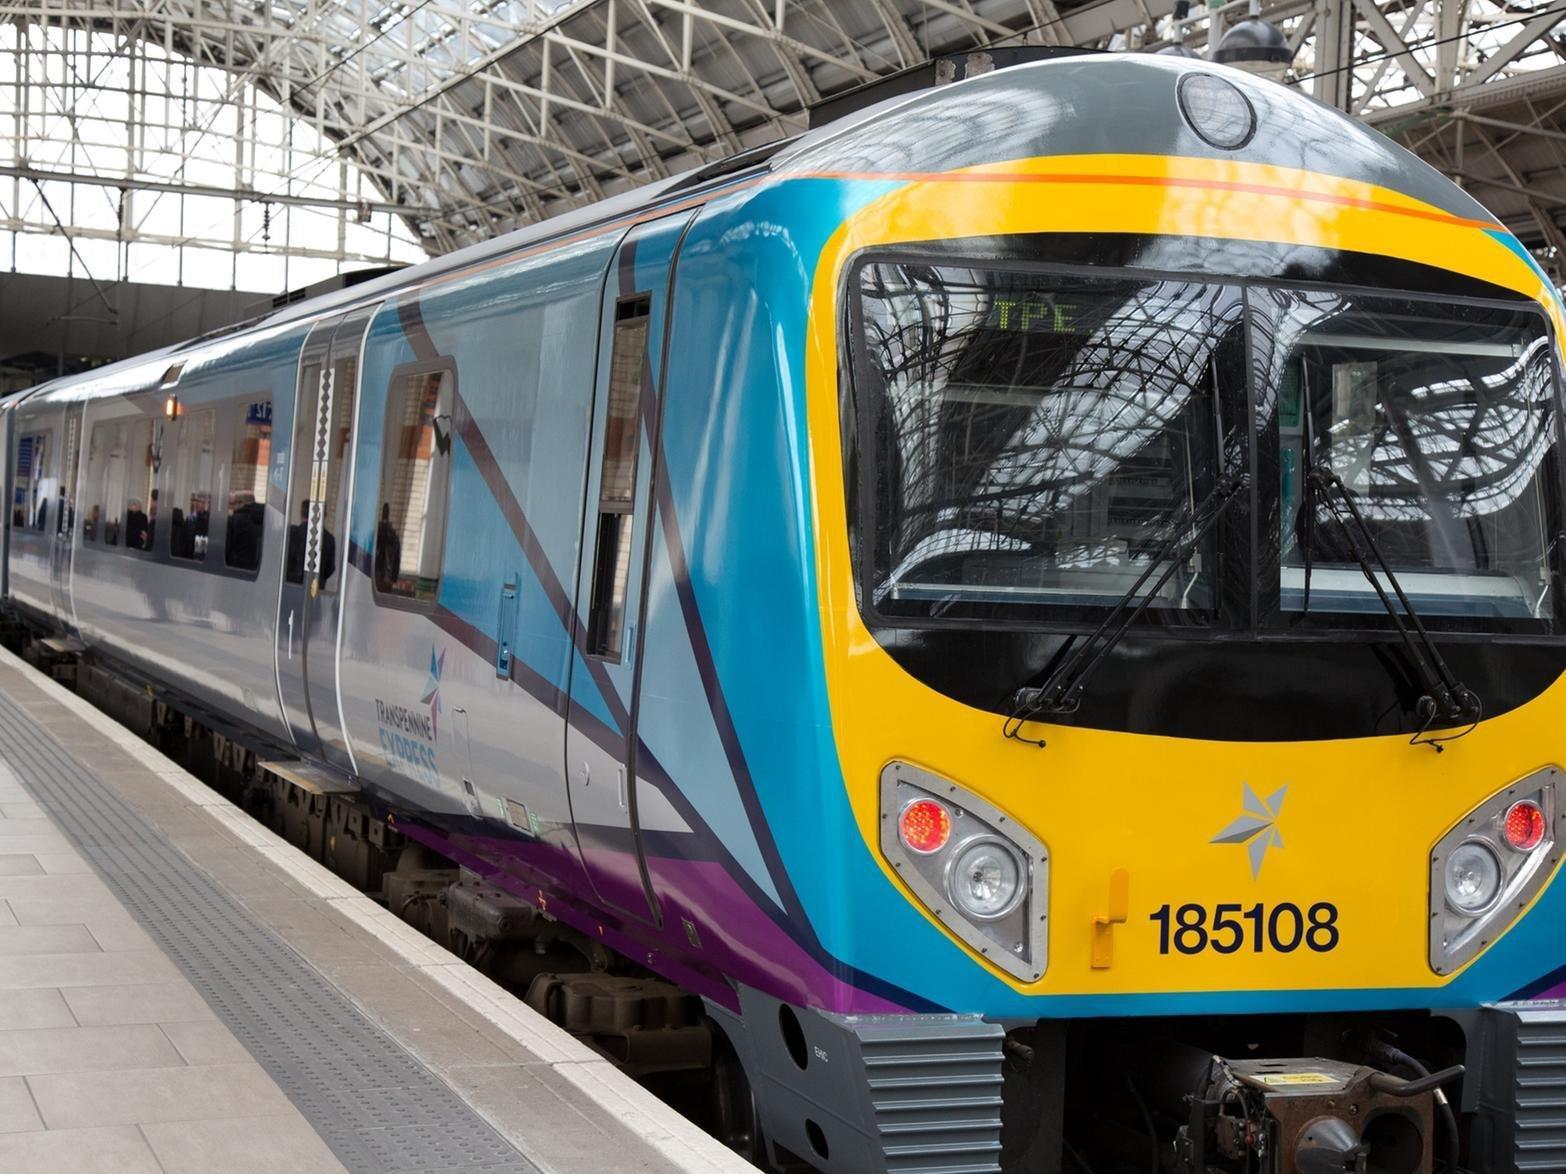 TransPennine Express rail strike: only a ‘small number’ of routes running - here are the services affected